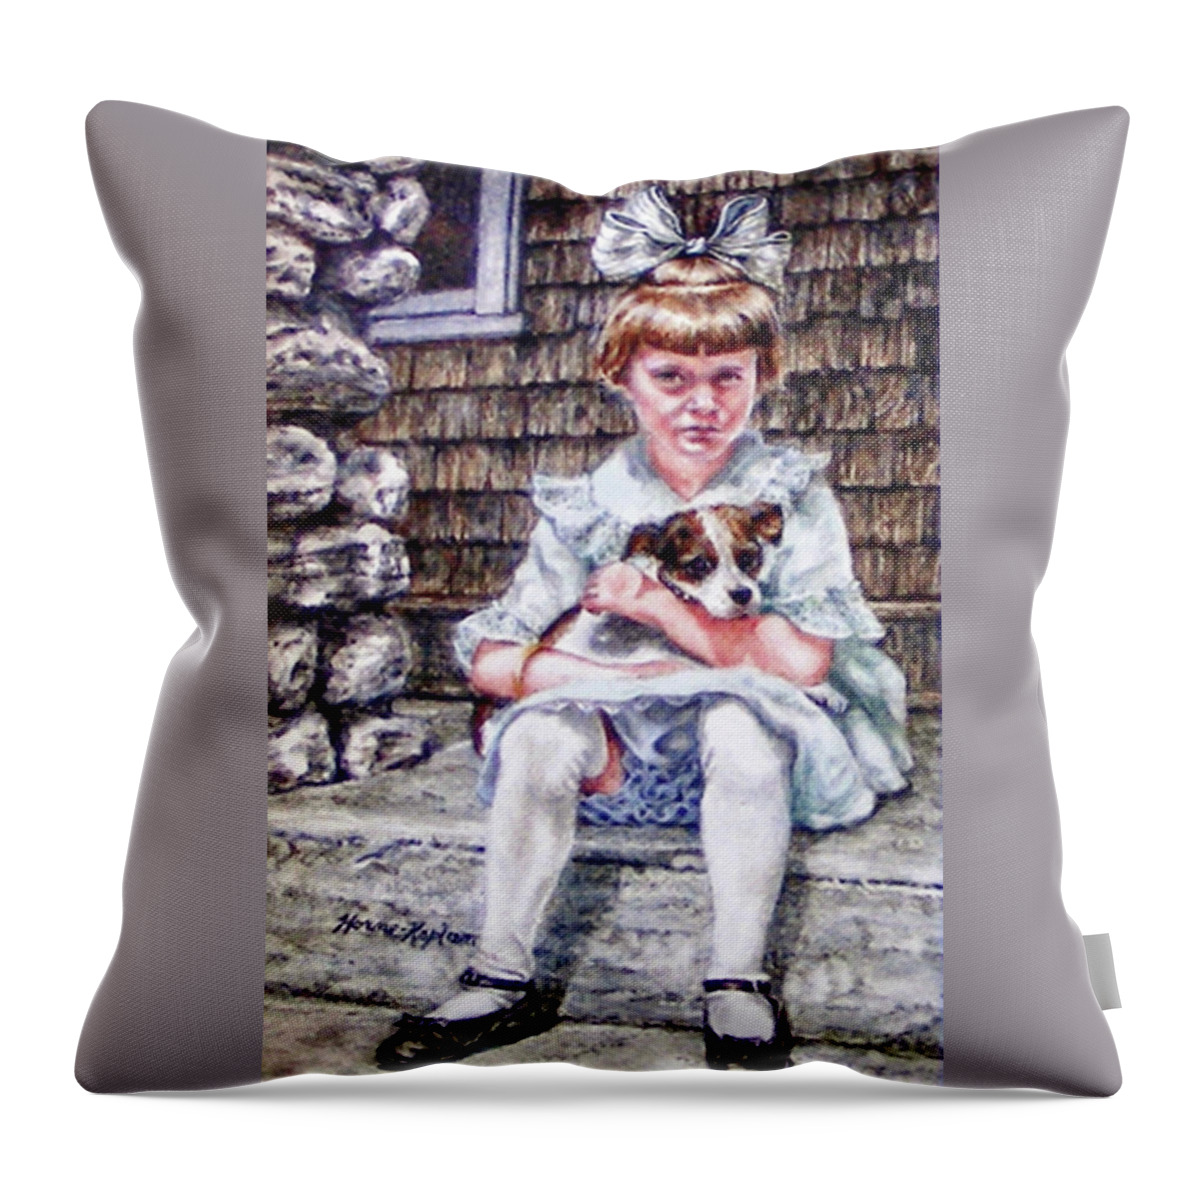 Antique Photo Throw Pillow featuring the painting Aunt Eve 1919, Finders Keepers by Denise Horne-Kaplan